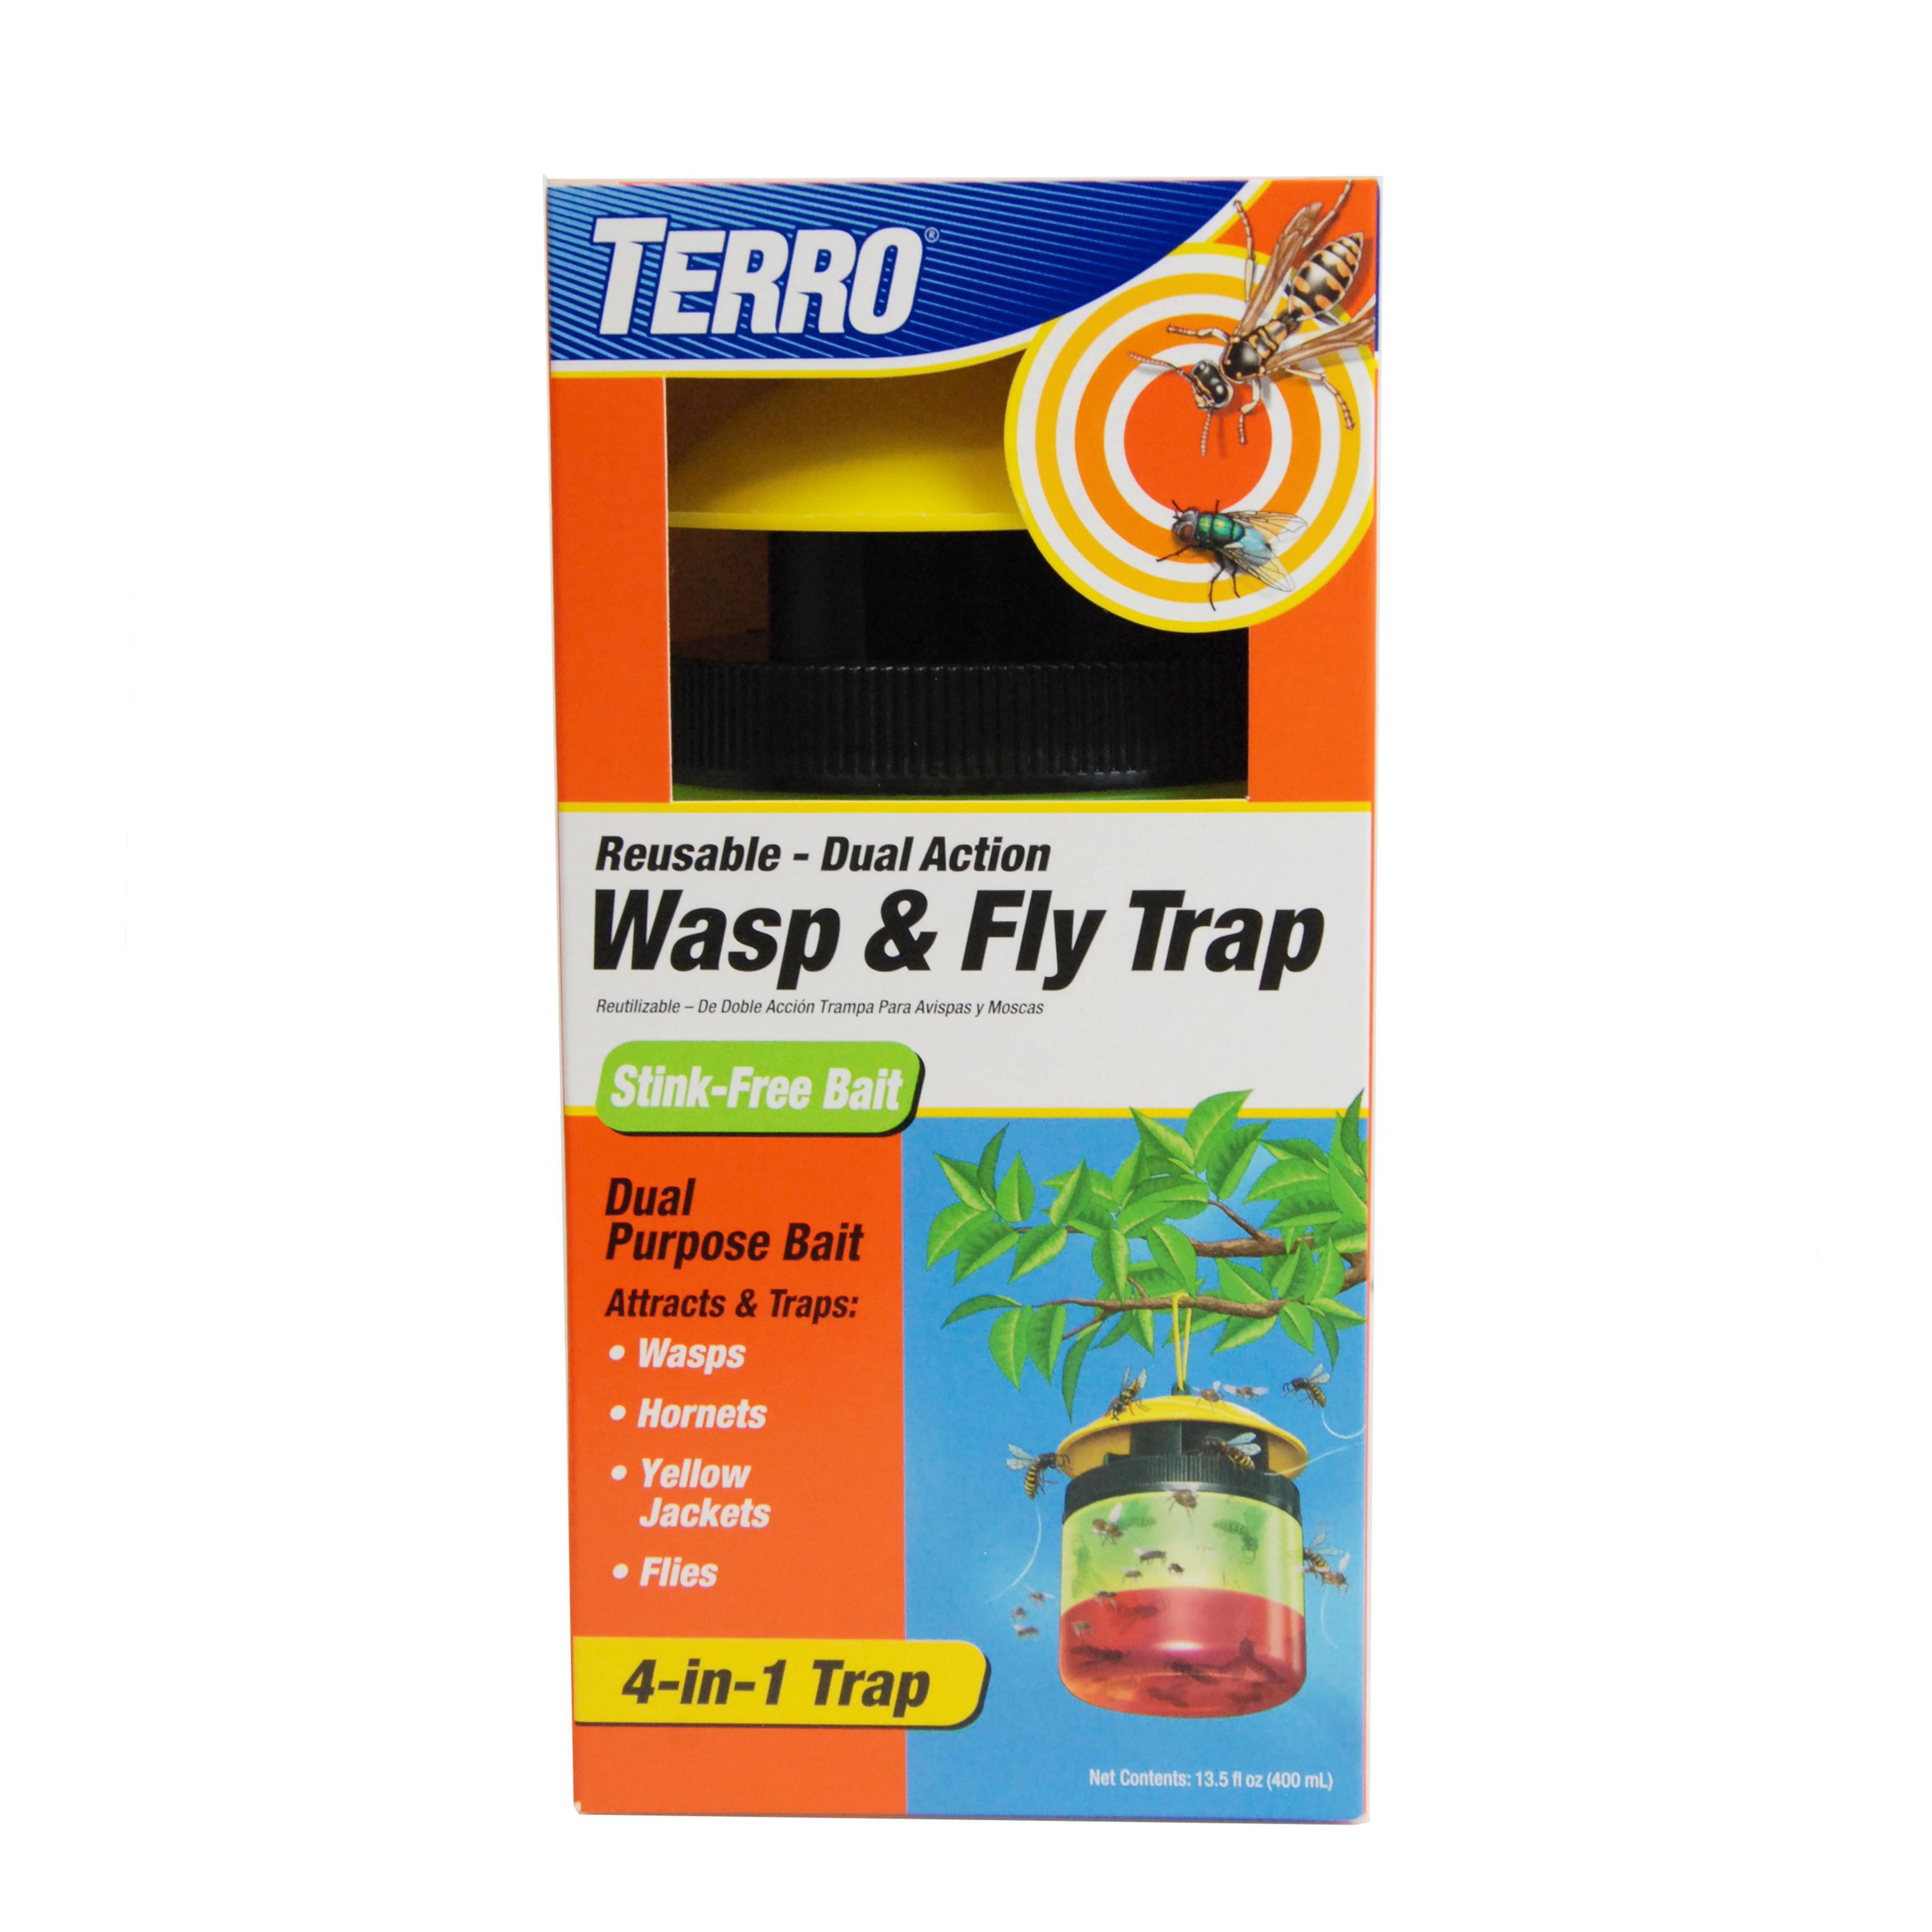 TERRO Fly Paper - 4 pack